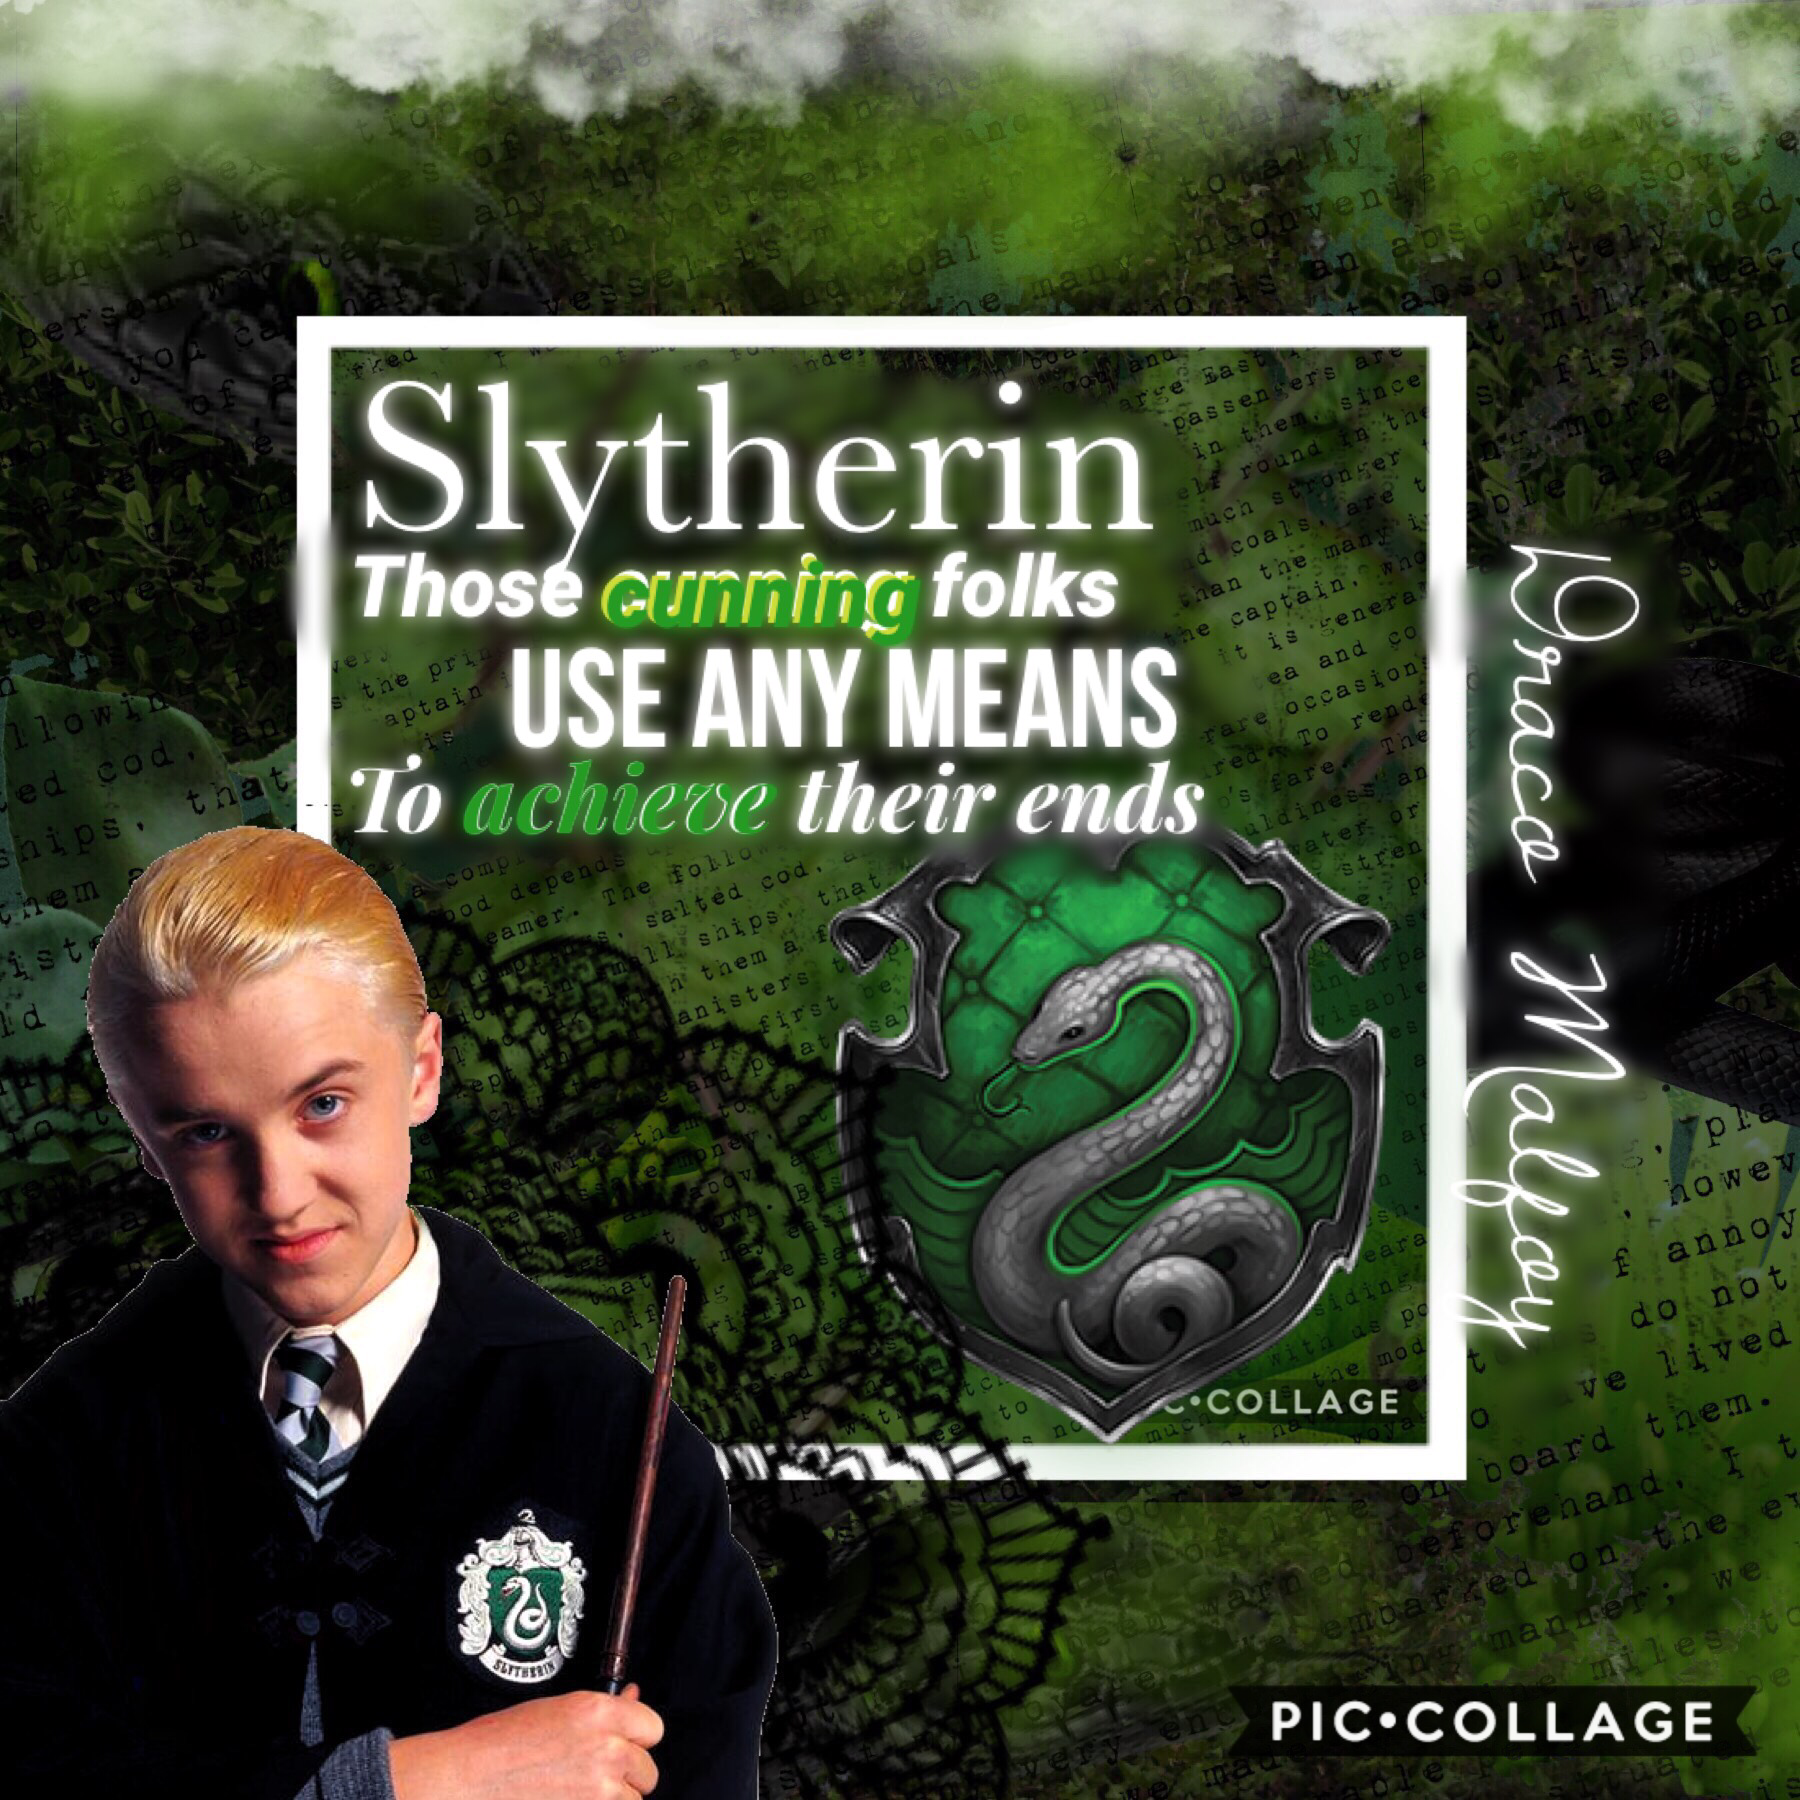 Guys I made a Slytherin oneeeee 😂 I rly have to stop procrastinating... I might log off for a while tmr tho :”